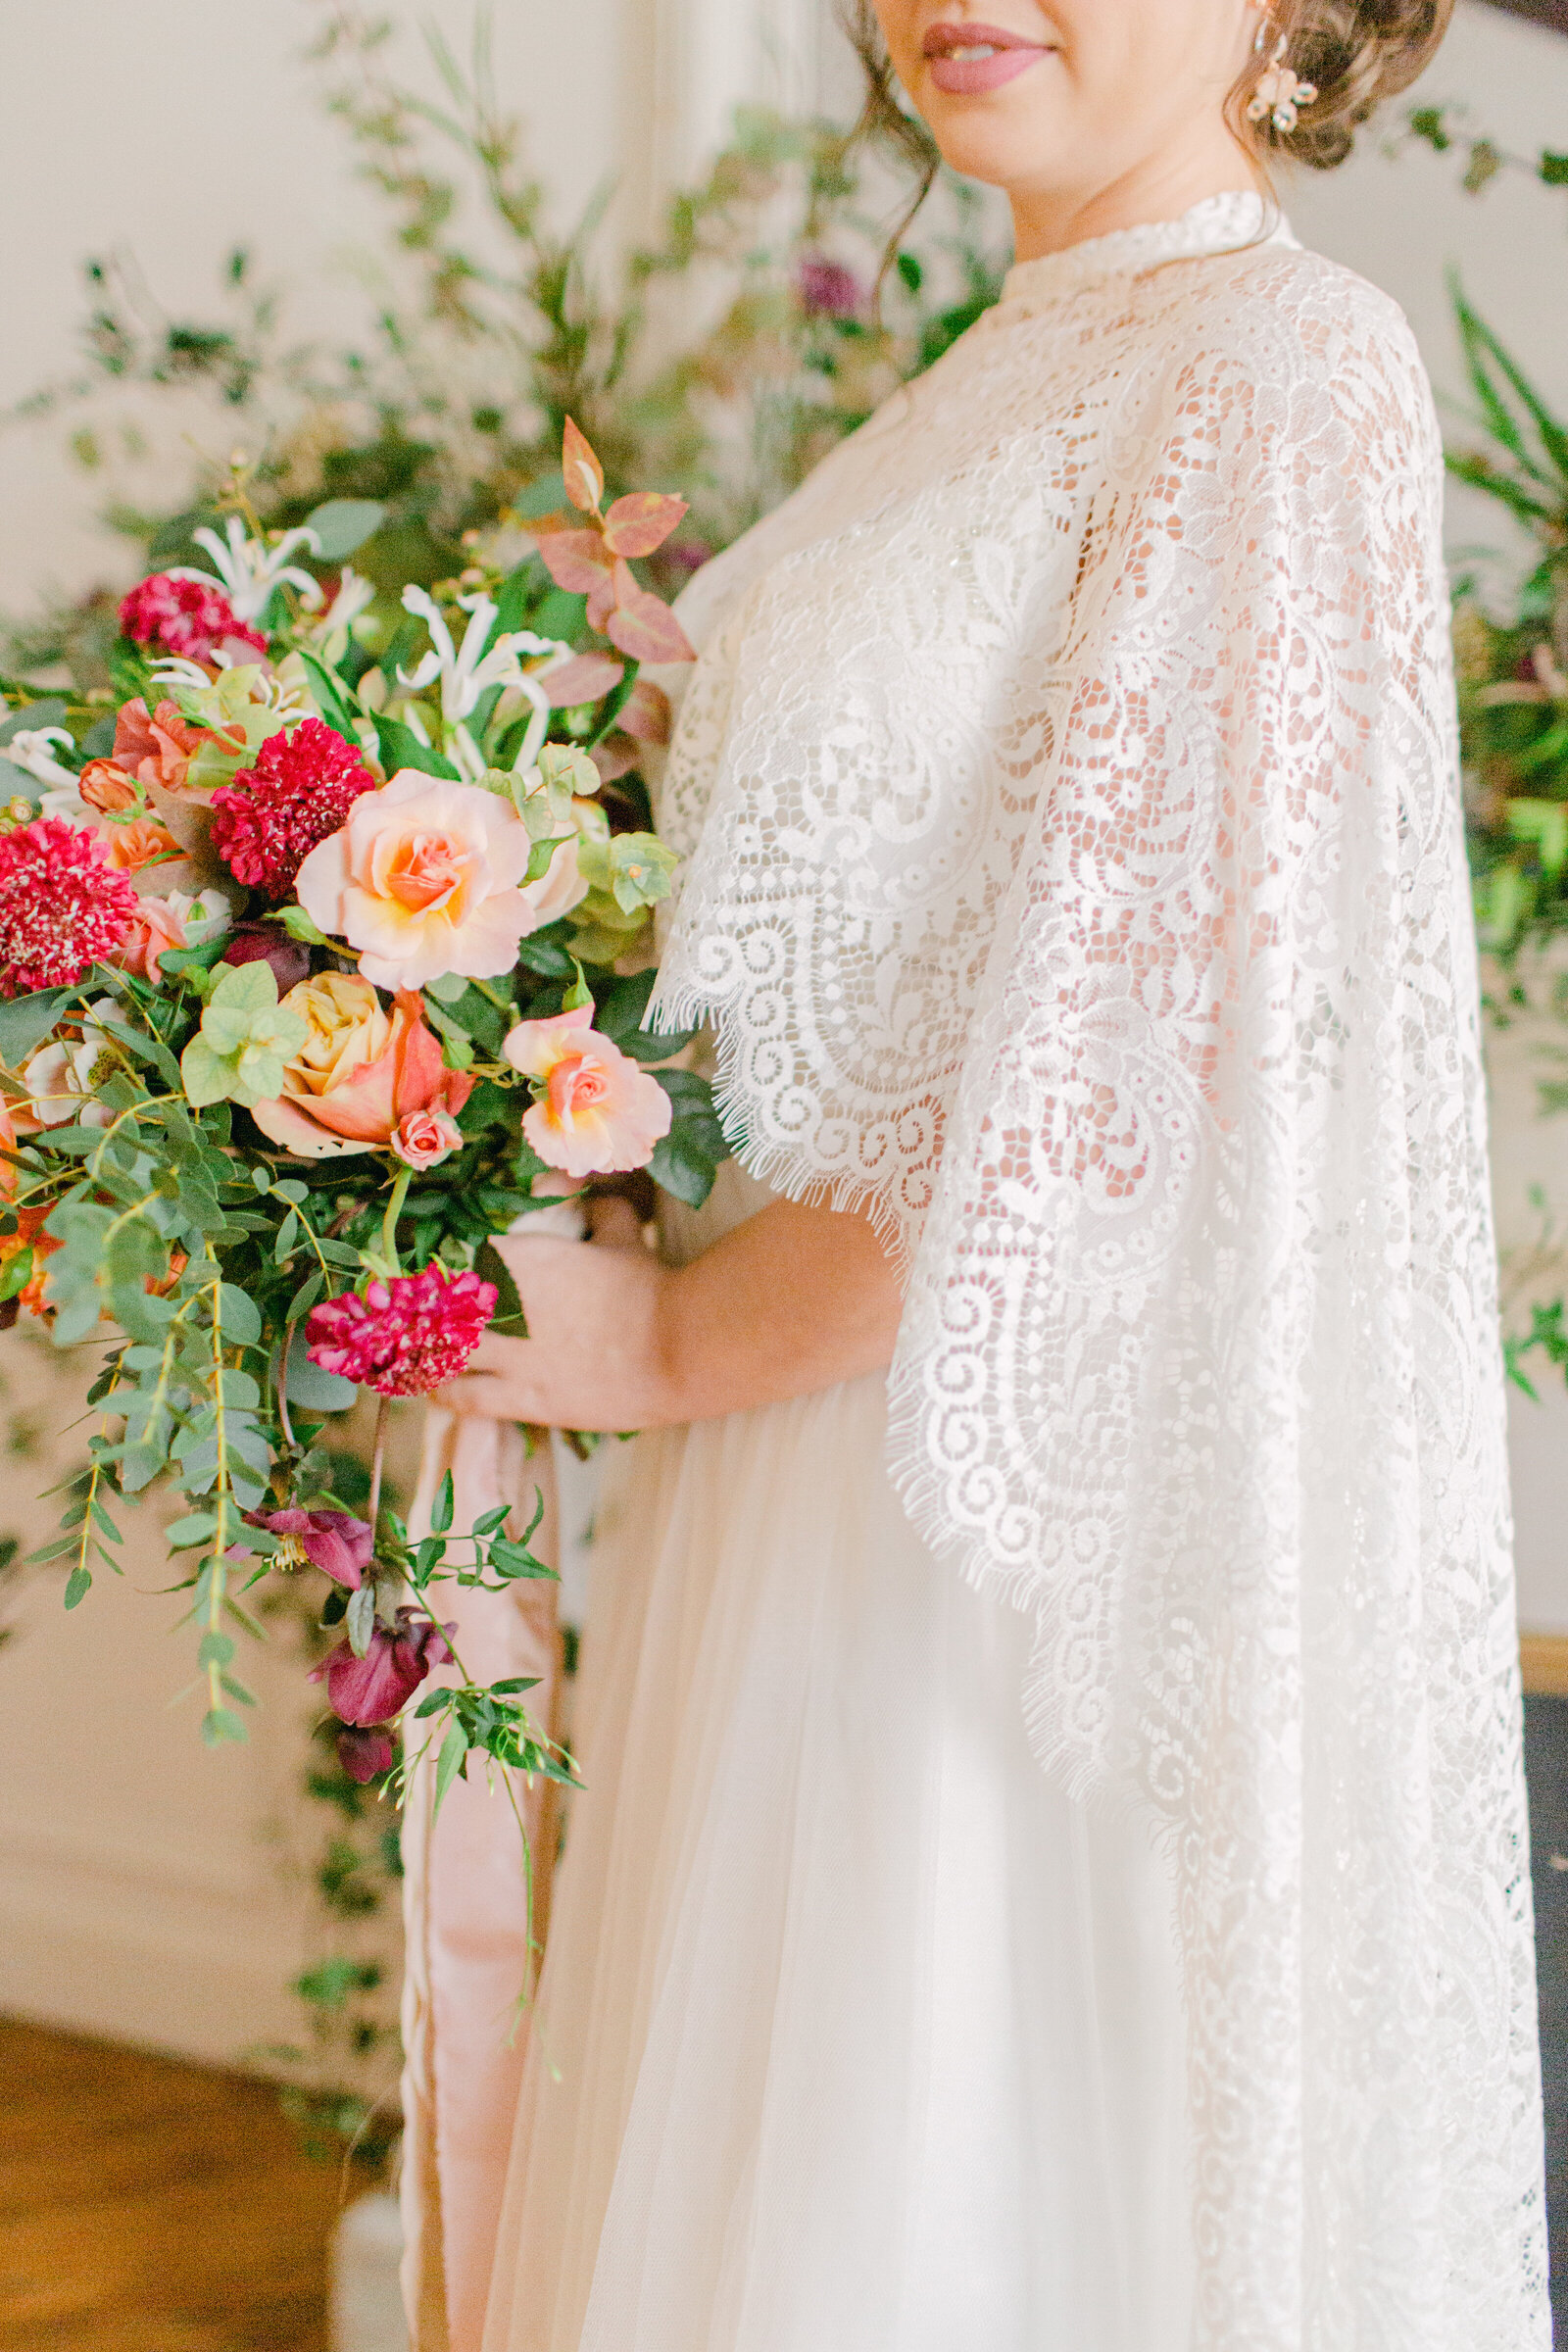 bride holding bouquet of flowers wearing a lace cape and standing in front of a fireplace mantel in paris apartment